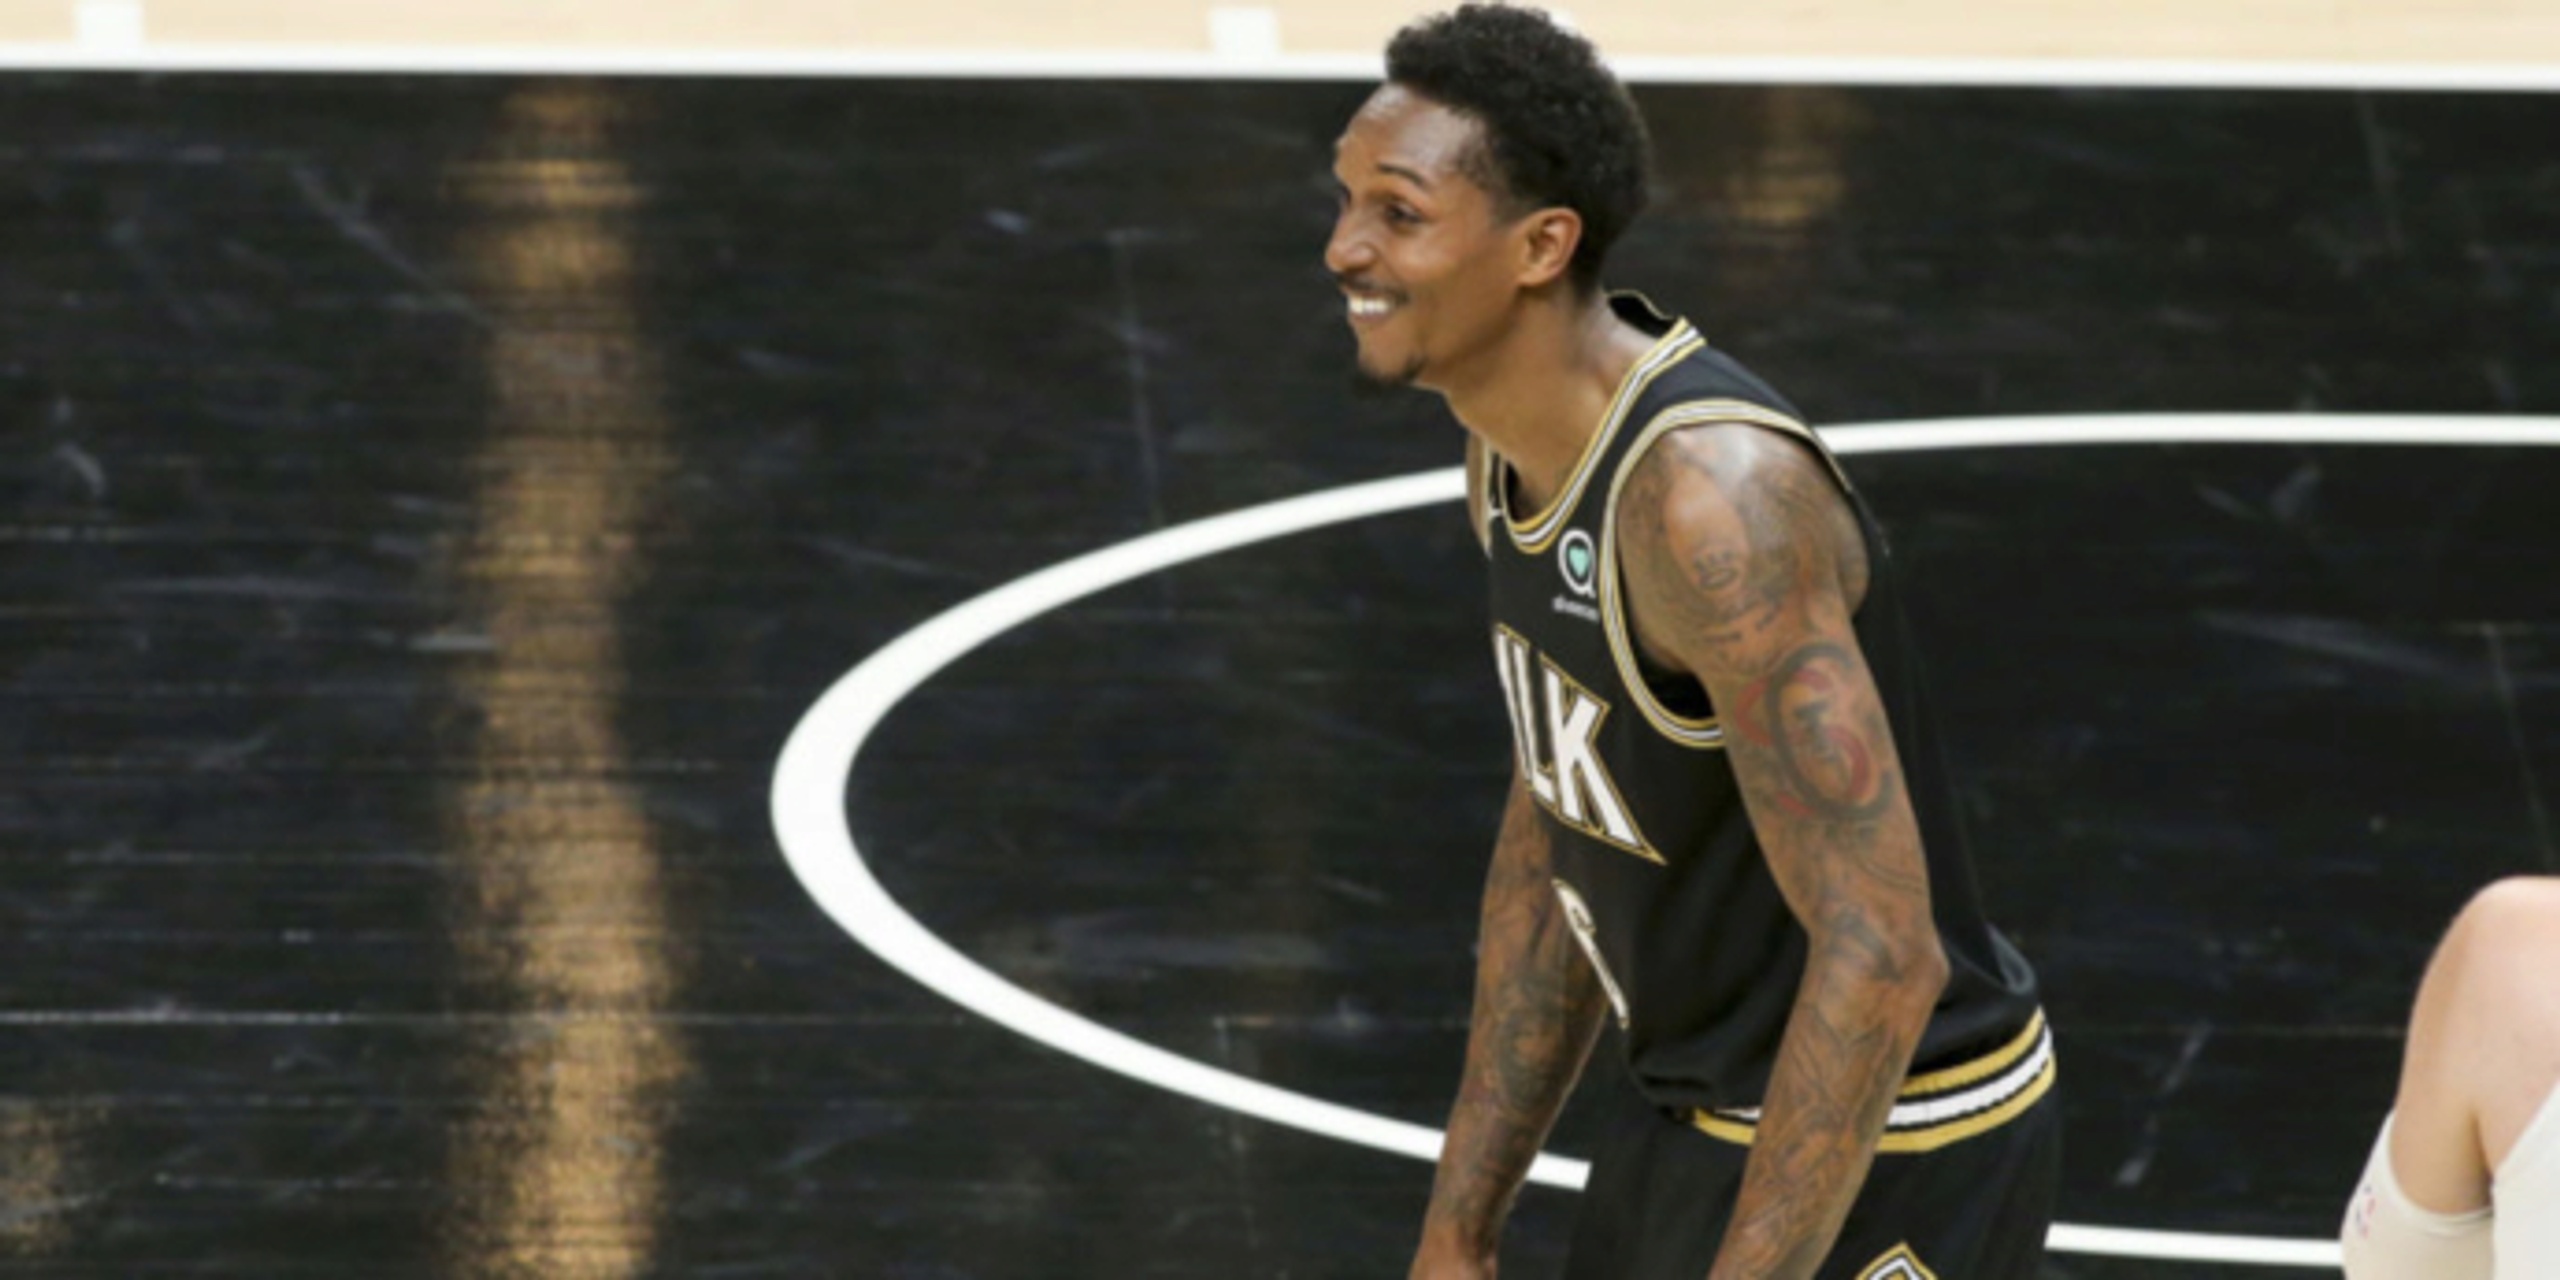 Lou Williams to return to Hawks on one-year deal